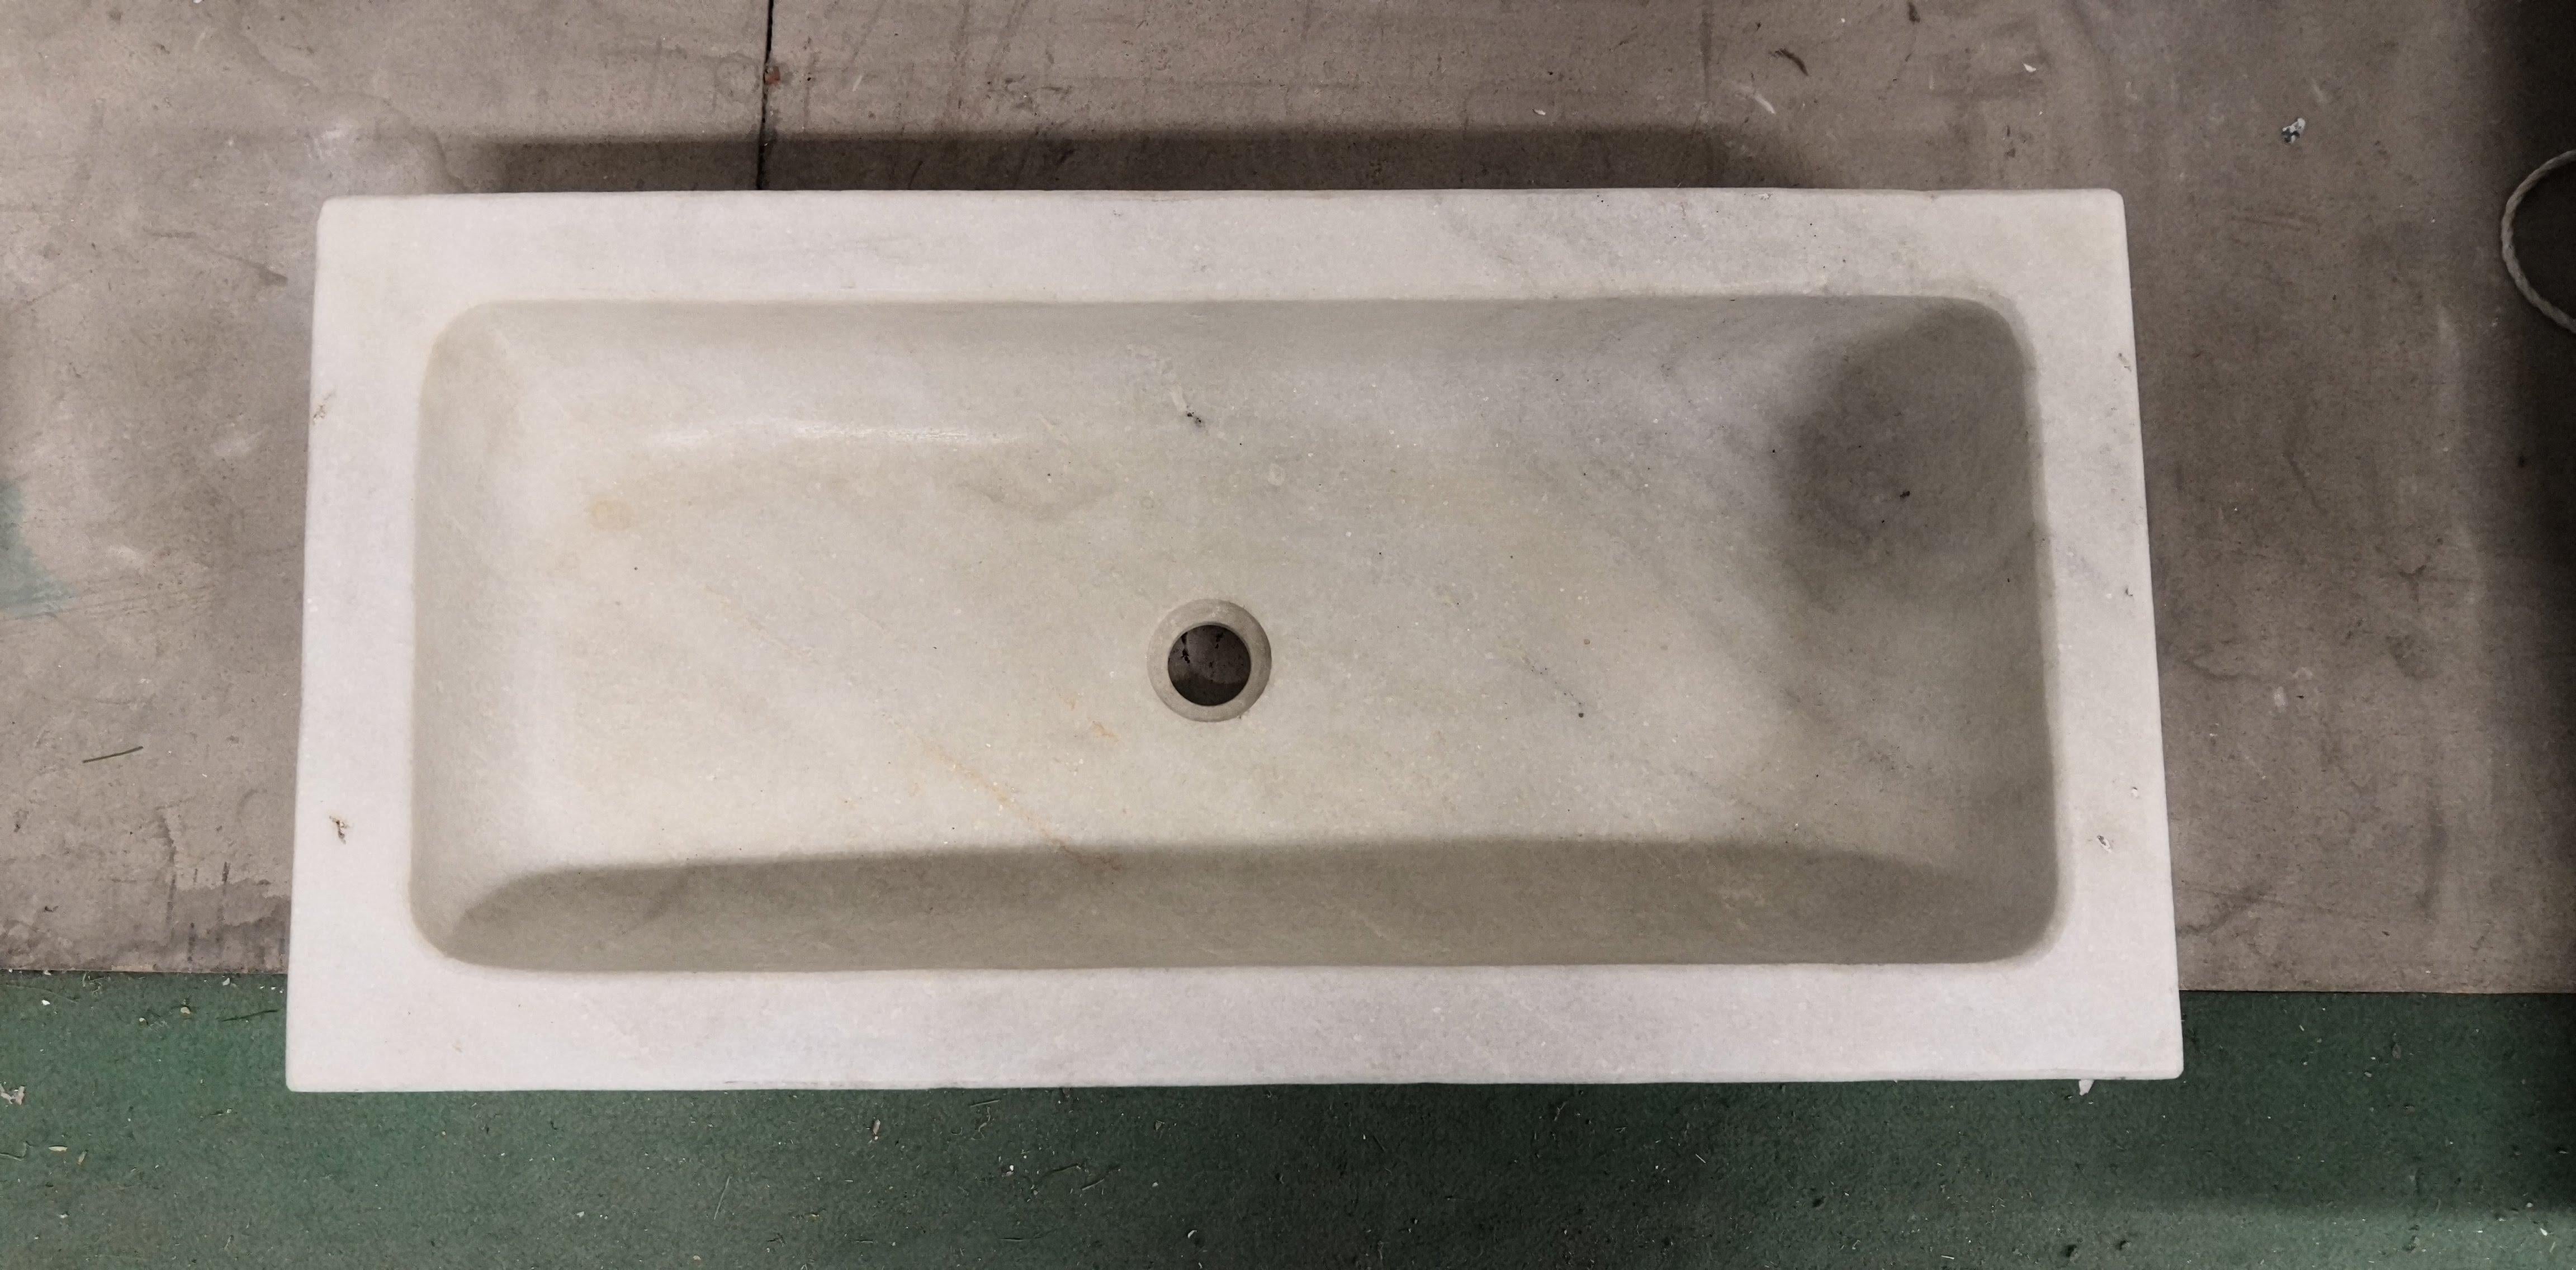 A simple natural design ideal for kitchen or bathroom for old and new buildings,
superb warm veined character, cut from one piece of carrara marble.
Sink manufactured in Carrara Marble, custom sizing available.
 